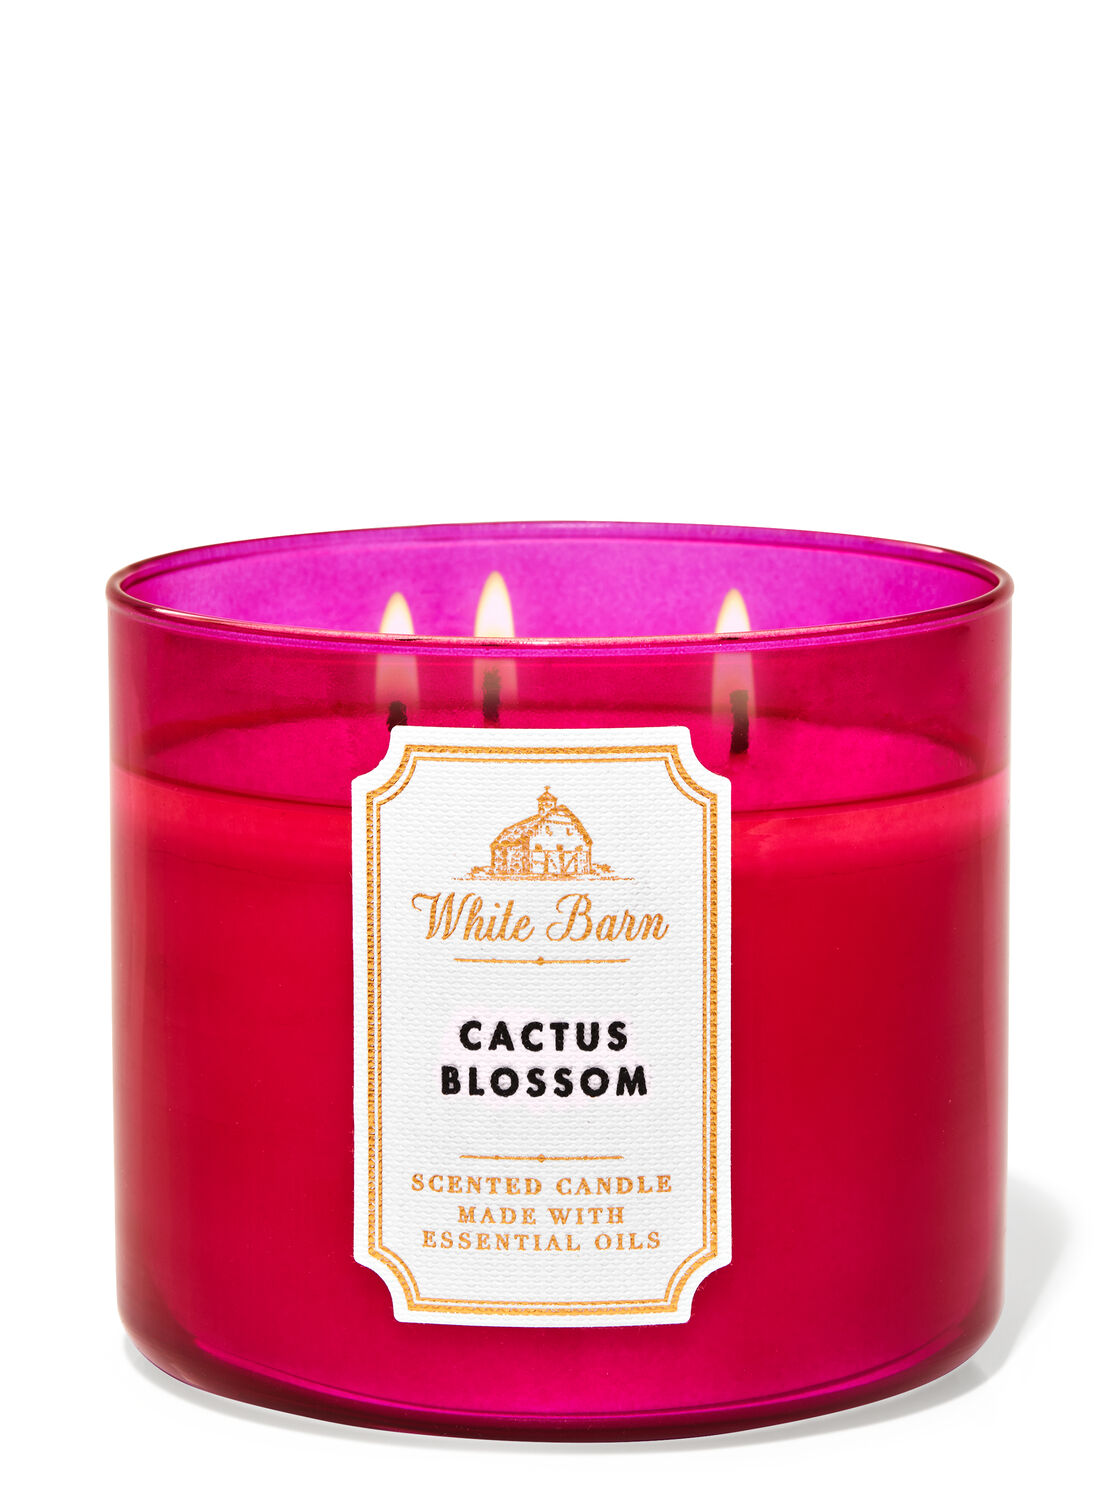 Cactus Blossom 3 Wick Candle Bath Body Works